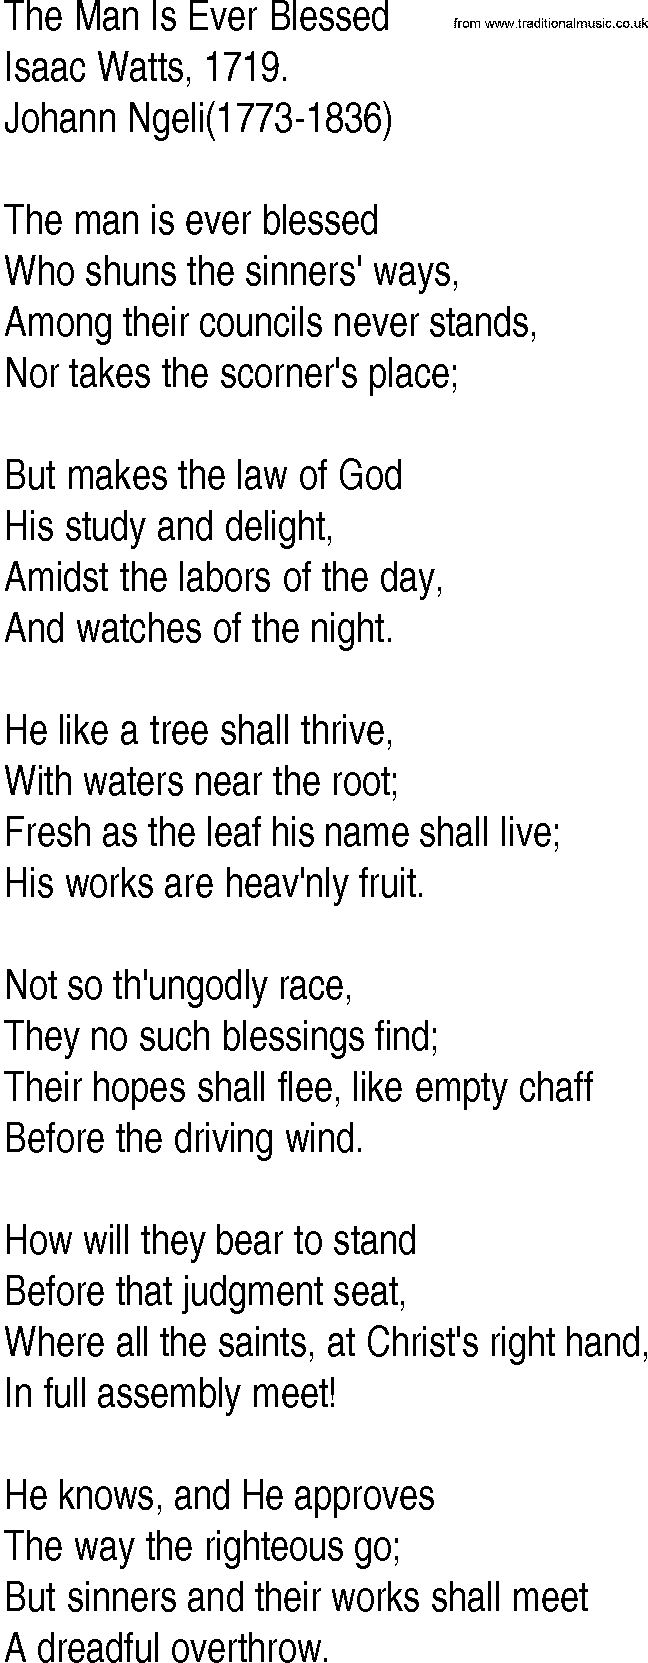 Hymn and Gospel Song: The Man Is Ever Blessed by Isaac Watts lyrics